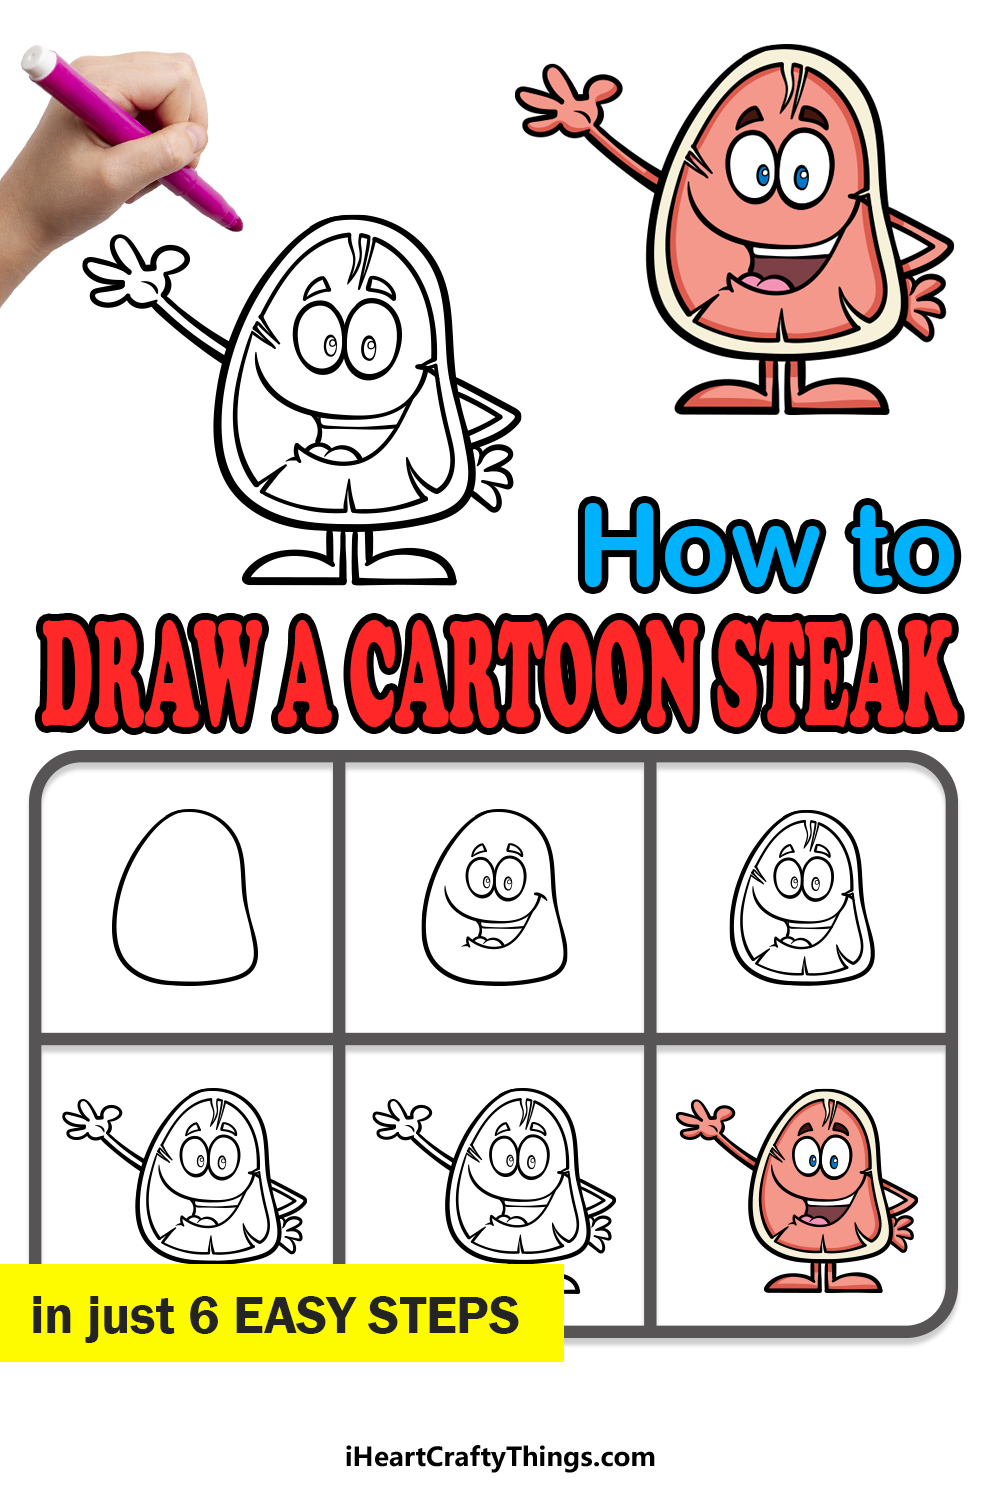 how to draw a cartoon steak in 6 easy steps